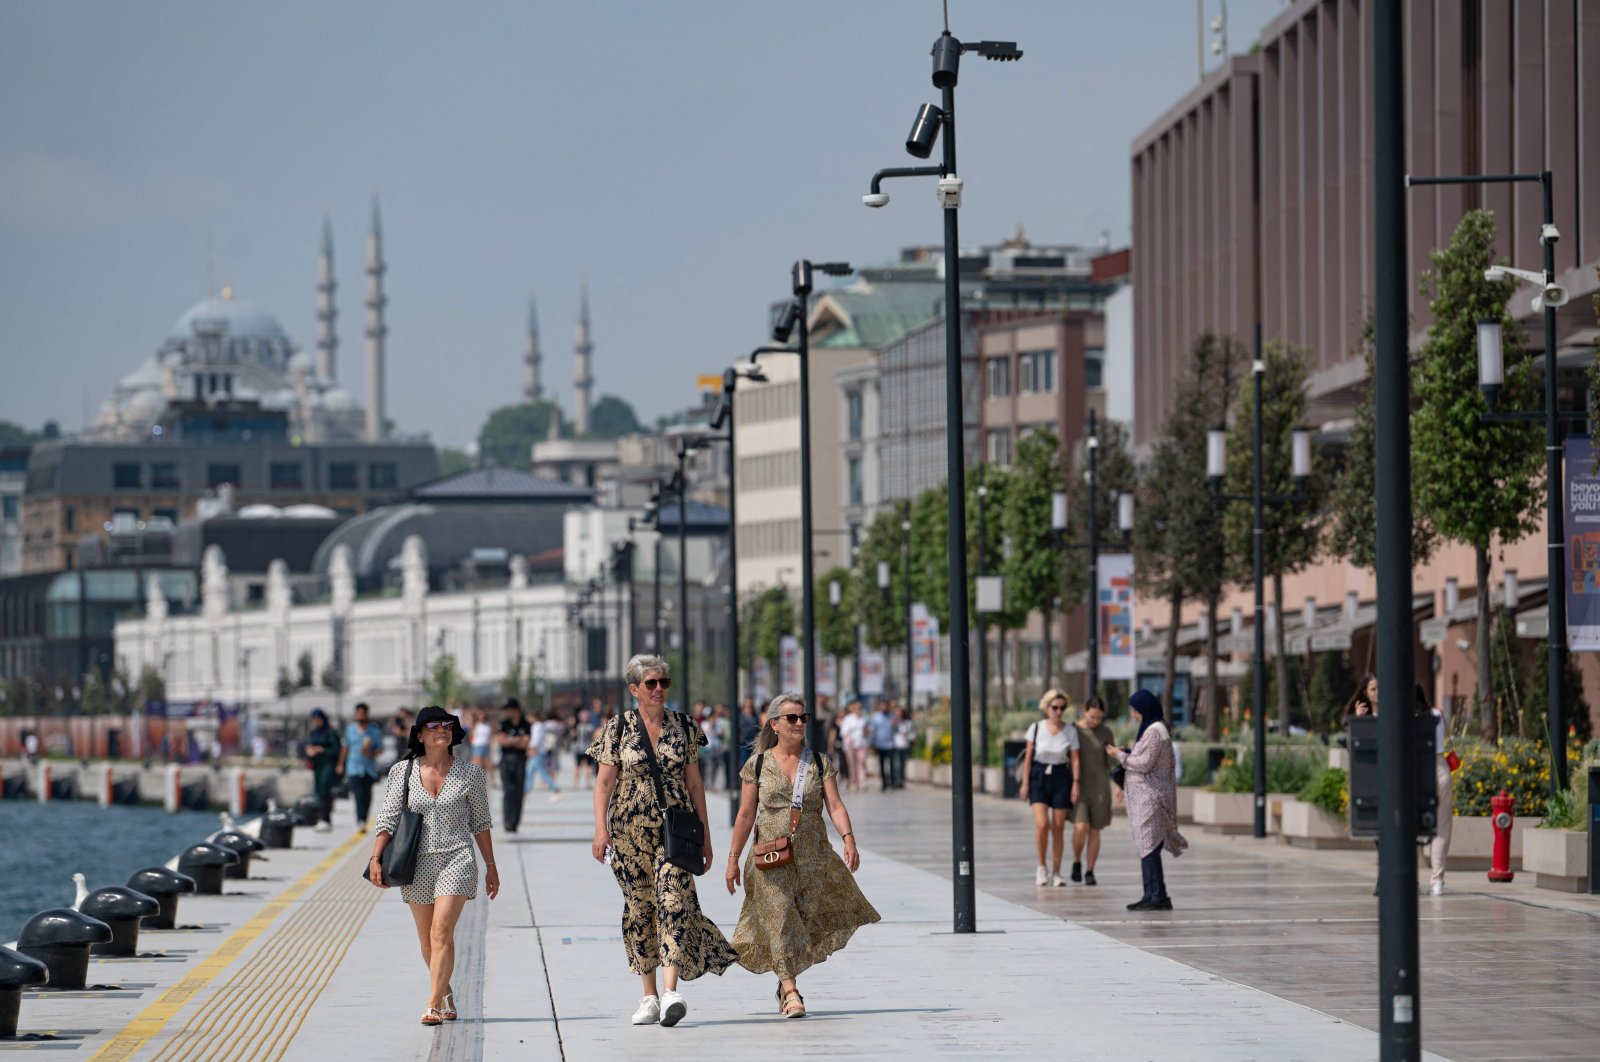 Visitors stroll in Galataport in Istanbul, Turkey, June 3, 2022. (AFP PHOTO)